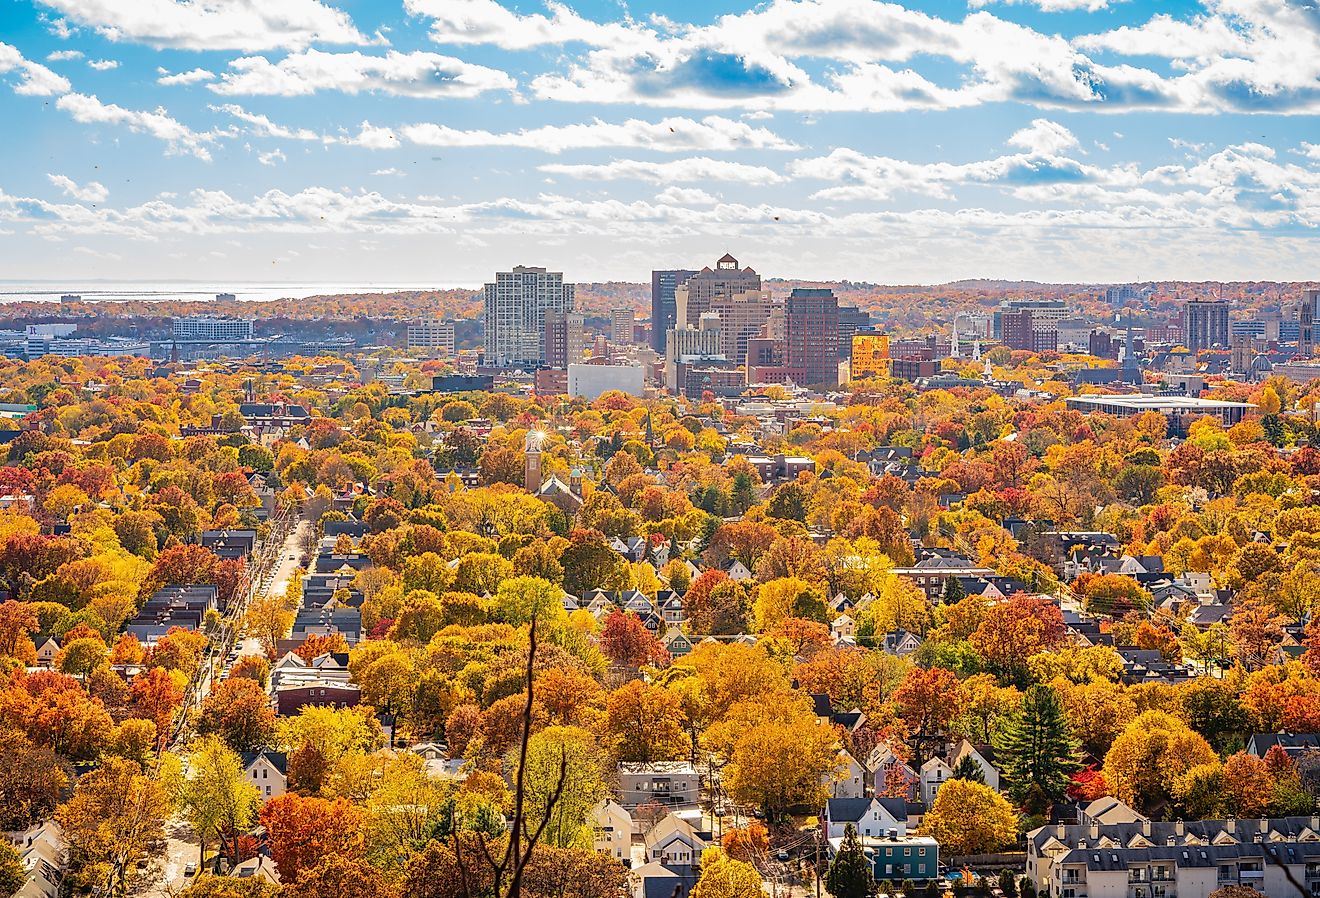 Beautiful fall views of New Haven and Yale University from the summit of East Rock Park. Image credit Winston Tan via Shutterstock.